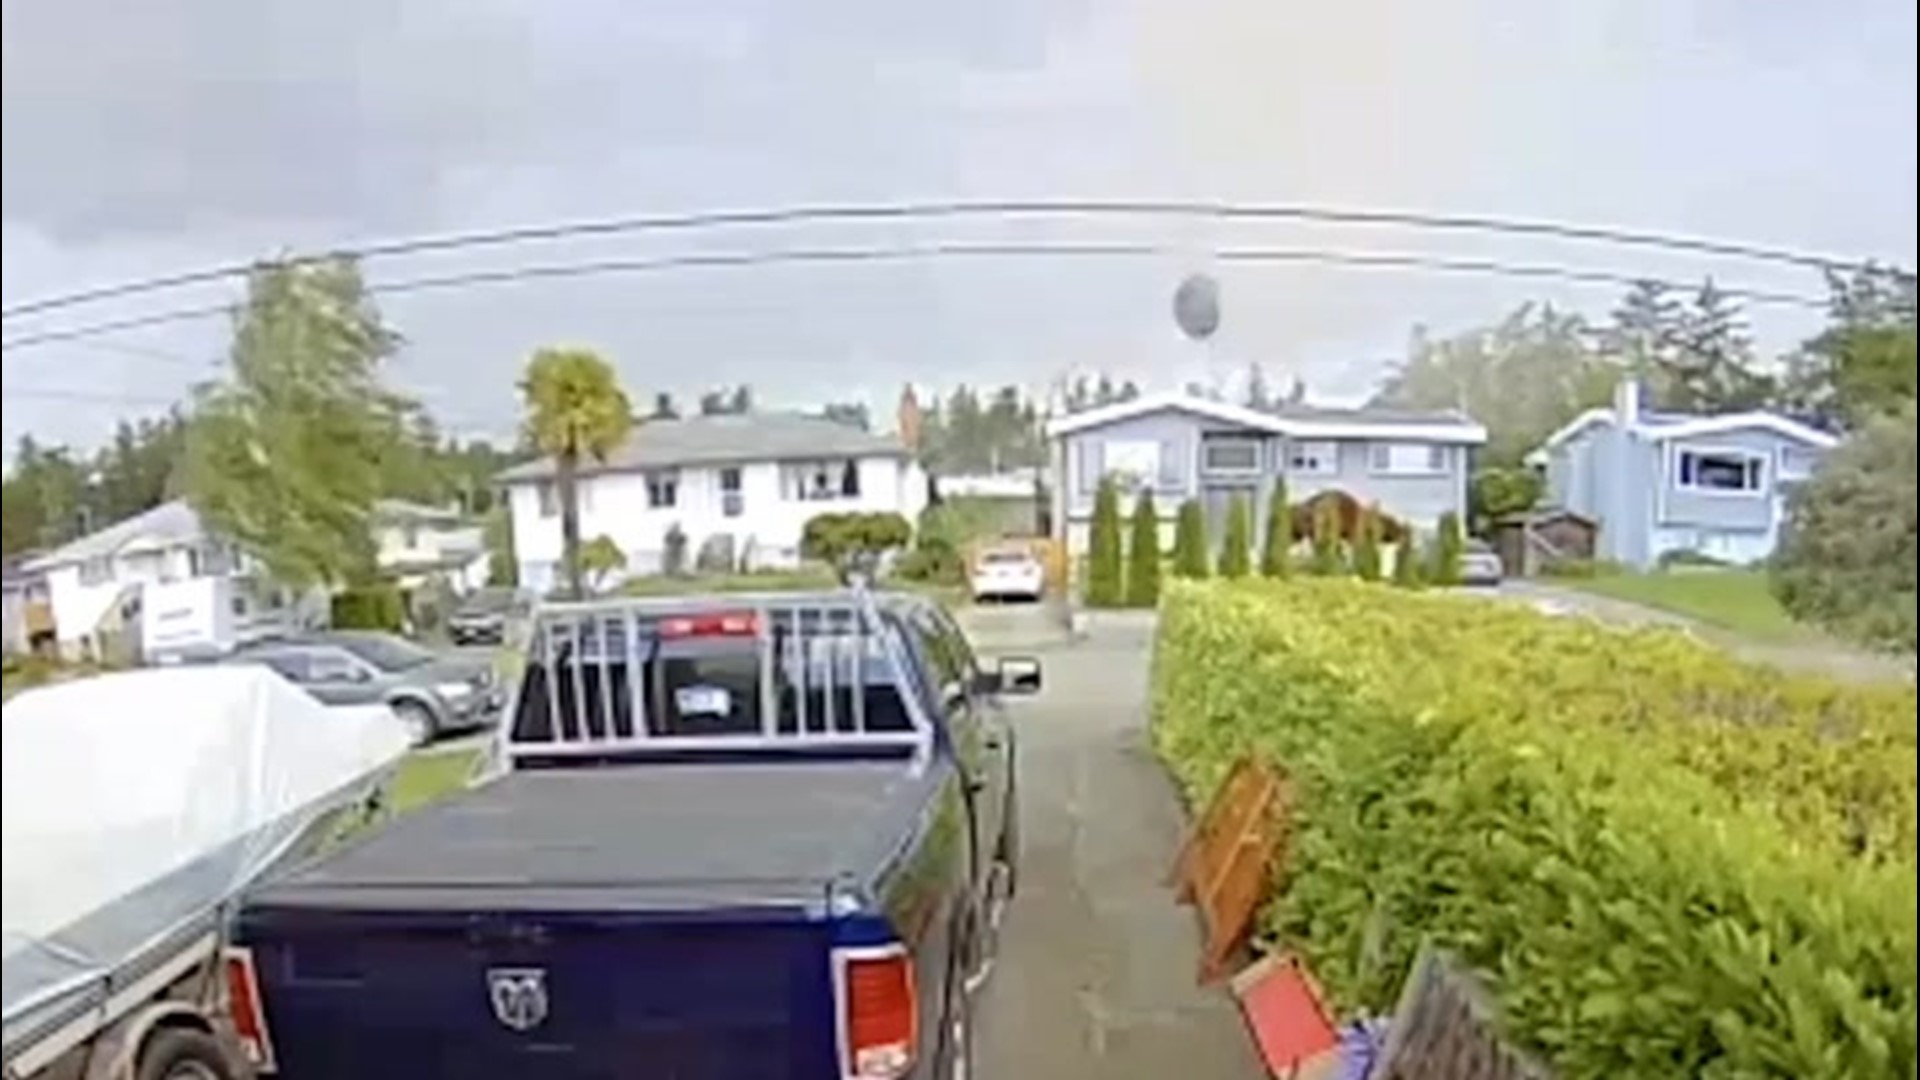 A home security camera captured the moment a possible tornado sent a trampoline flying into the air in Vancouver Island, British Columbia, on May 21.